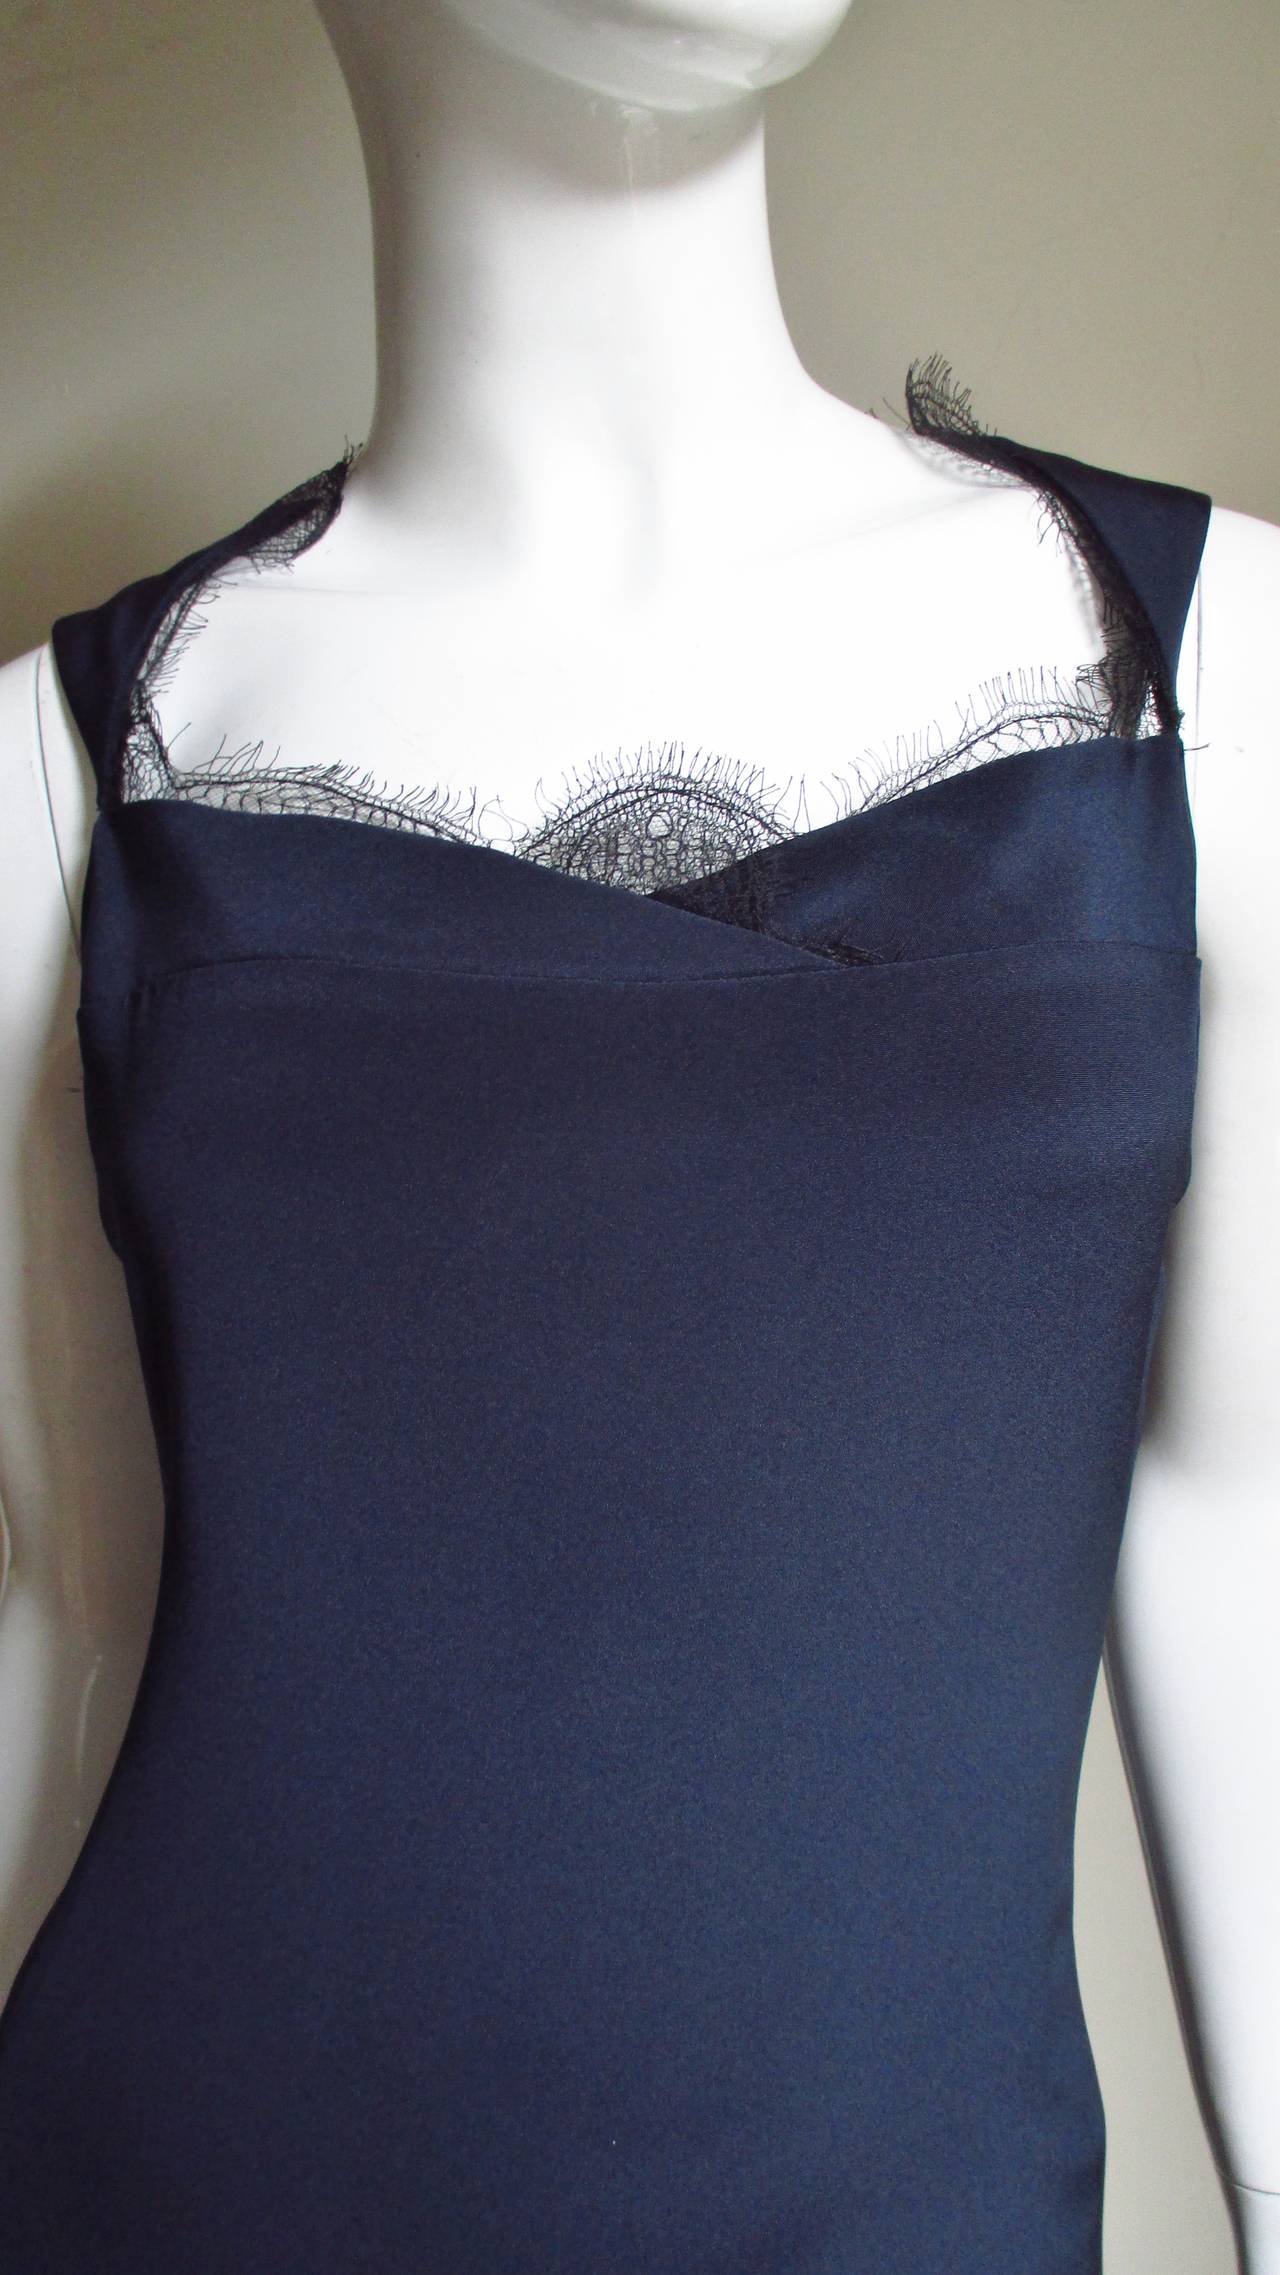 Bill Blass Lace Trim Navy Silk Dress 1990s In Excellent Condition For Sale In Water Mill, NY